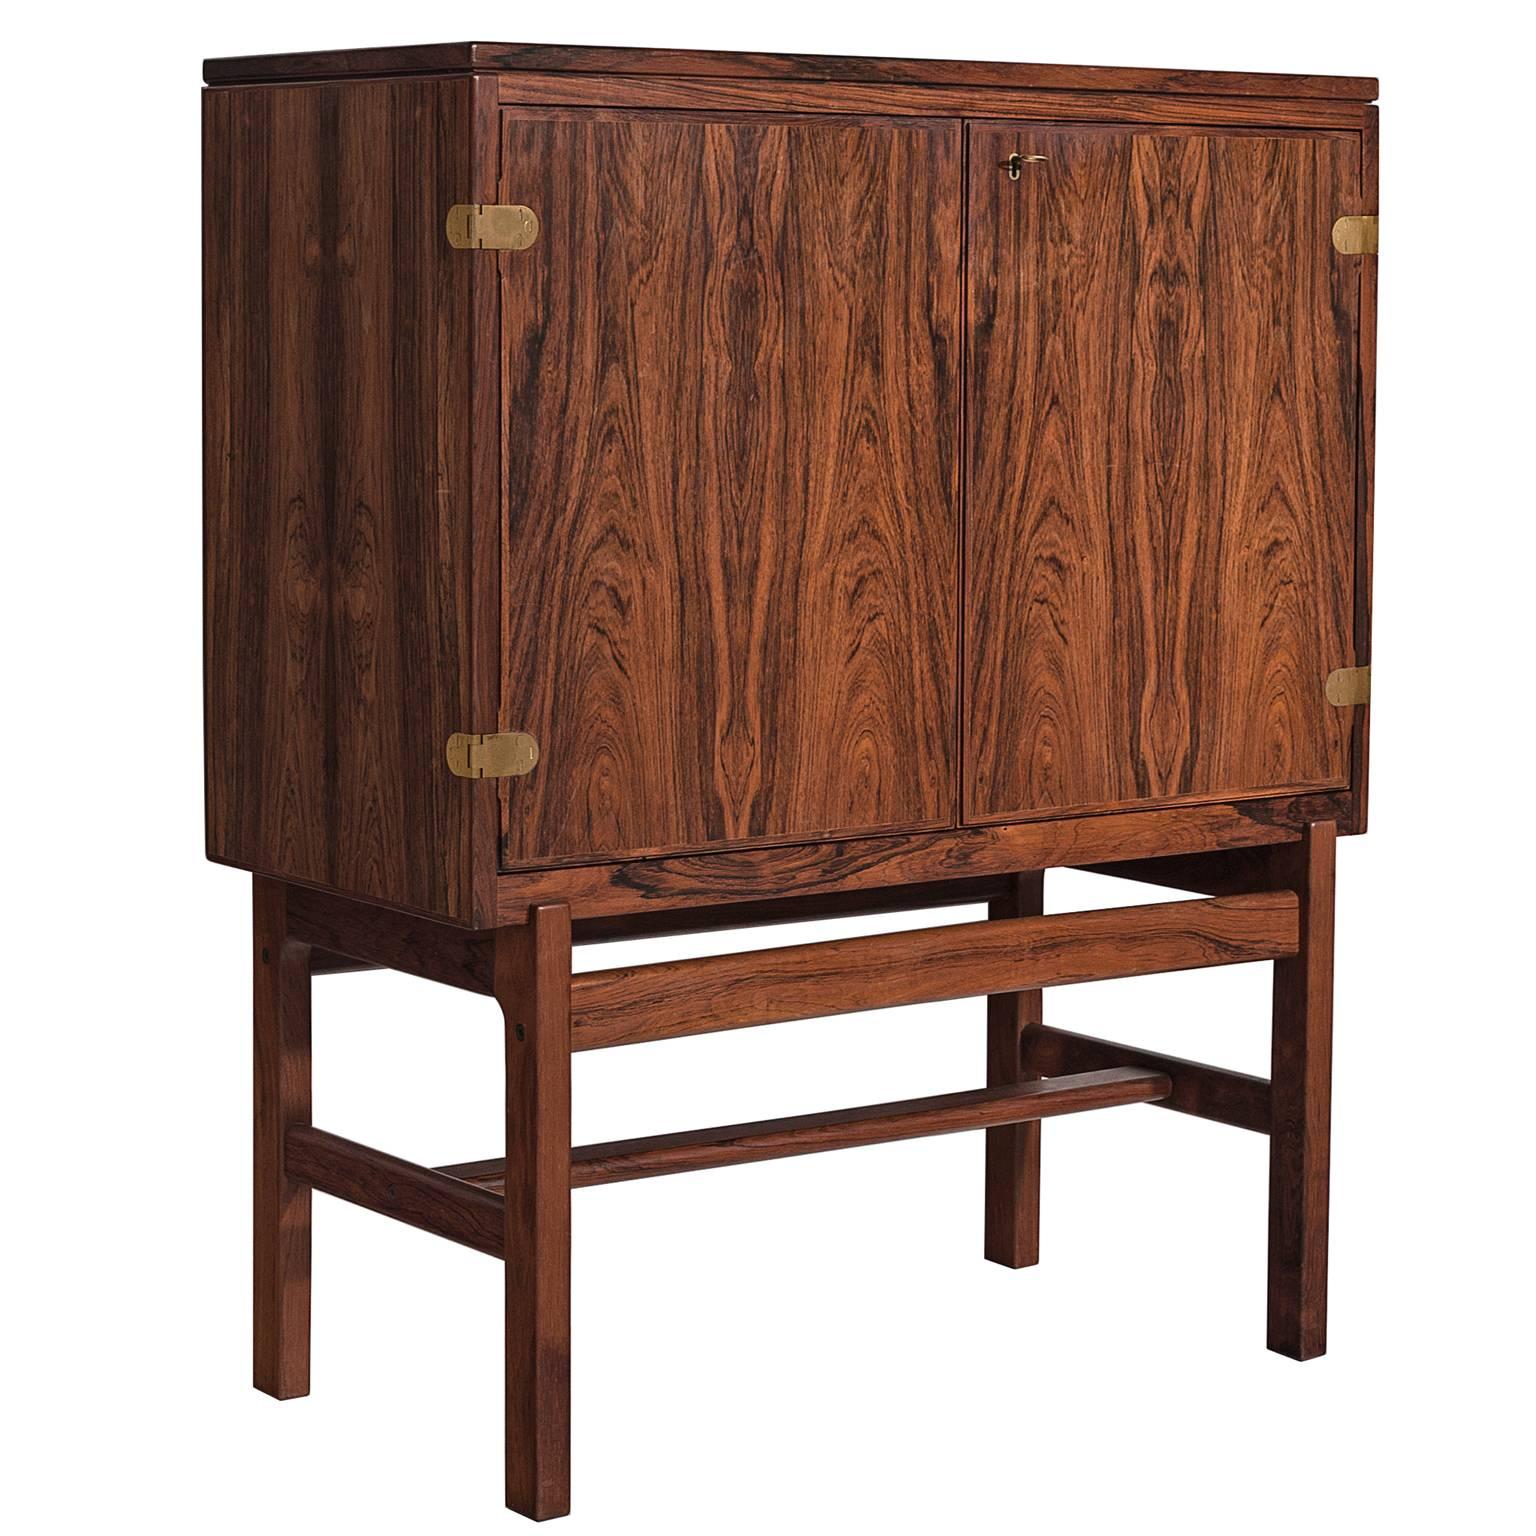 Dry bar cabinet, rosewood, brass, Denmark, 1960s.

Very well proportioned Danish bar cabinet with exceptionally well grained rosewood. Even the interior of the doors shows this grain which makes this bar very well suitable for leaving it open. The